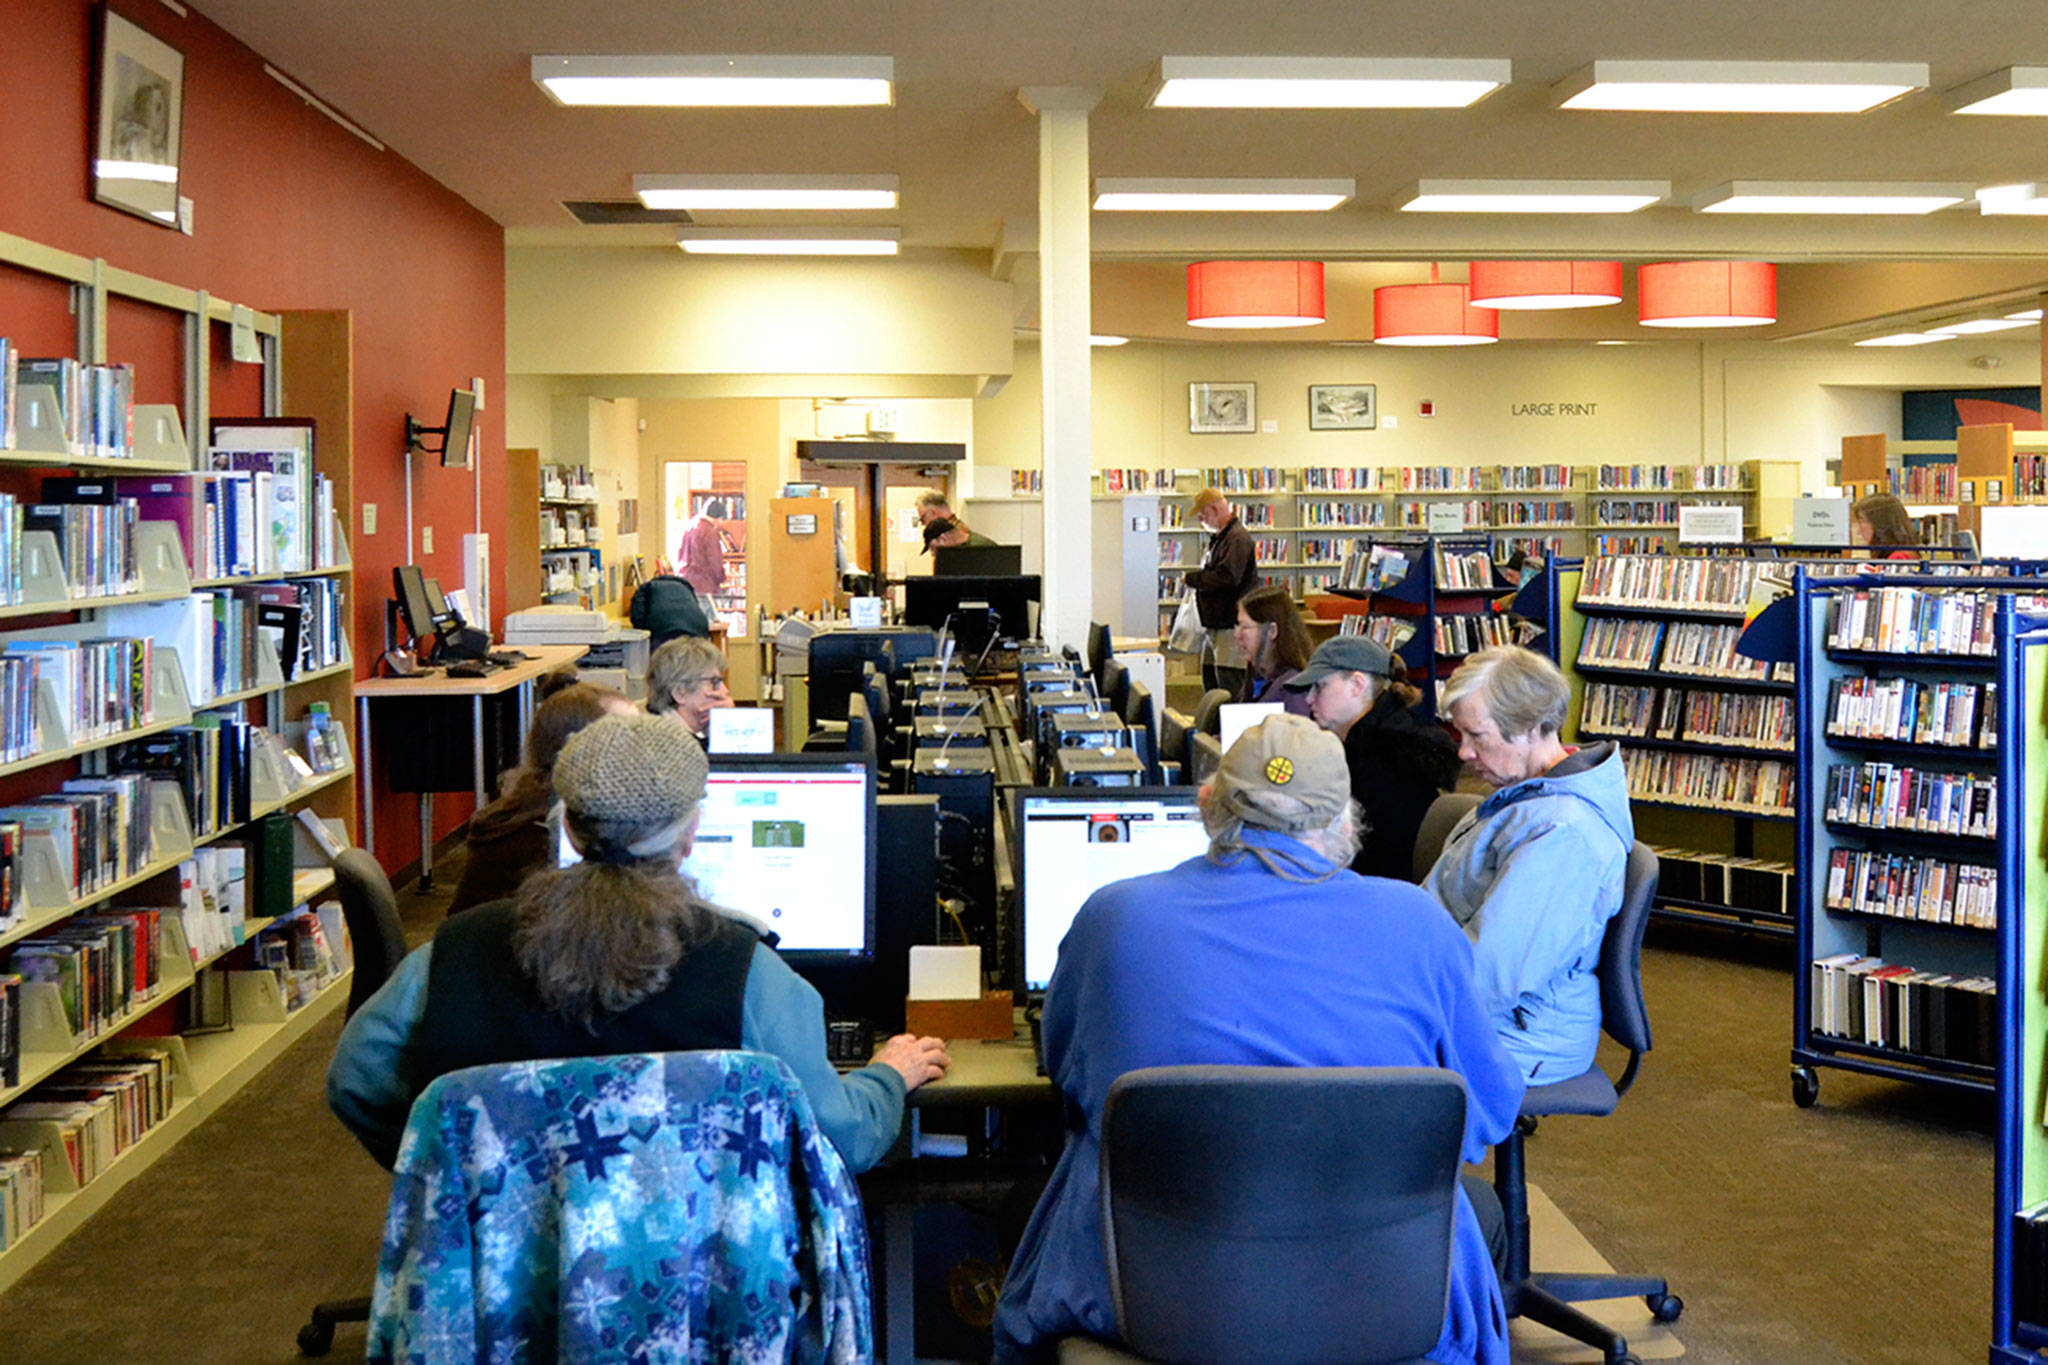 Patrons will likely have to wait until 2021 to see if the North Olympic Library System’s trustees will consider going back to voters again to expand the Sequim Library. Trustees voted on Feb. 28 to postpone staff work until then to focus on long-term planning. Sequim Gazette photo by Matthew Nash